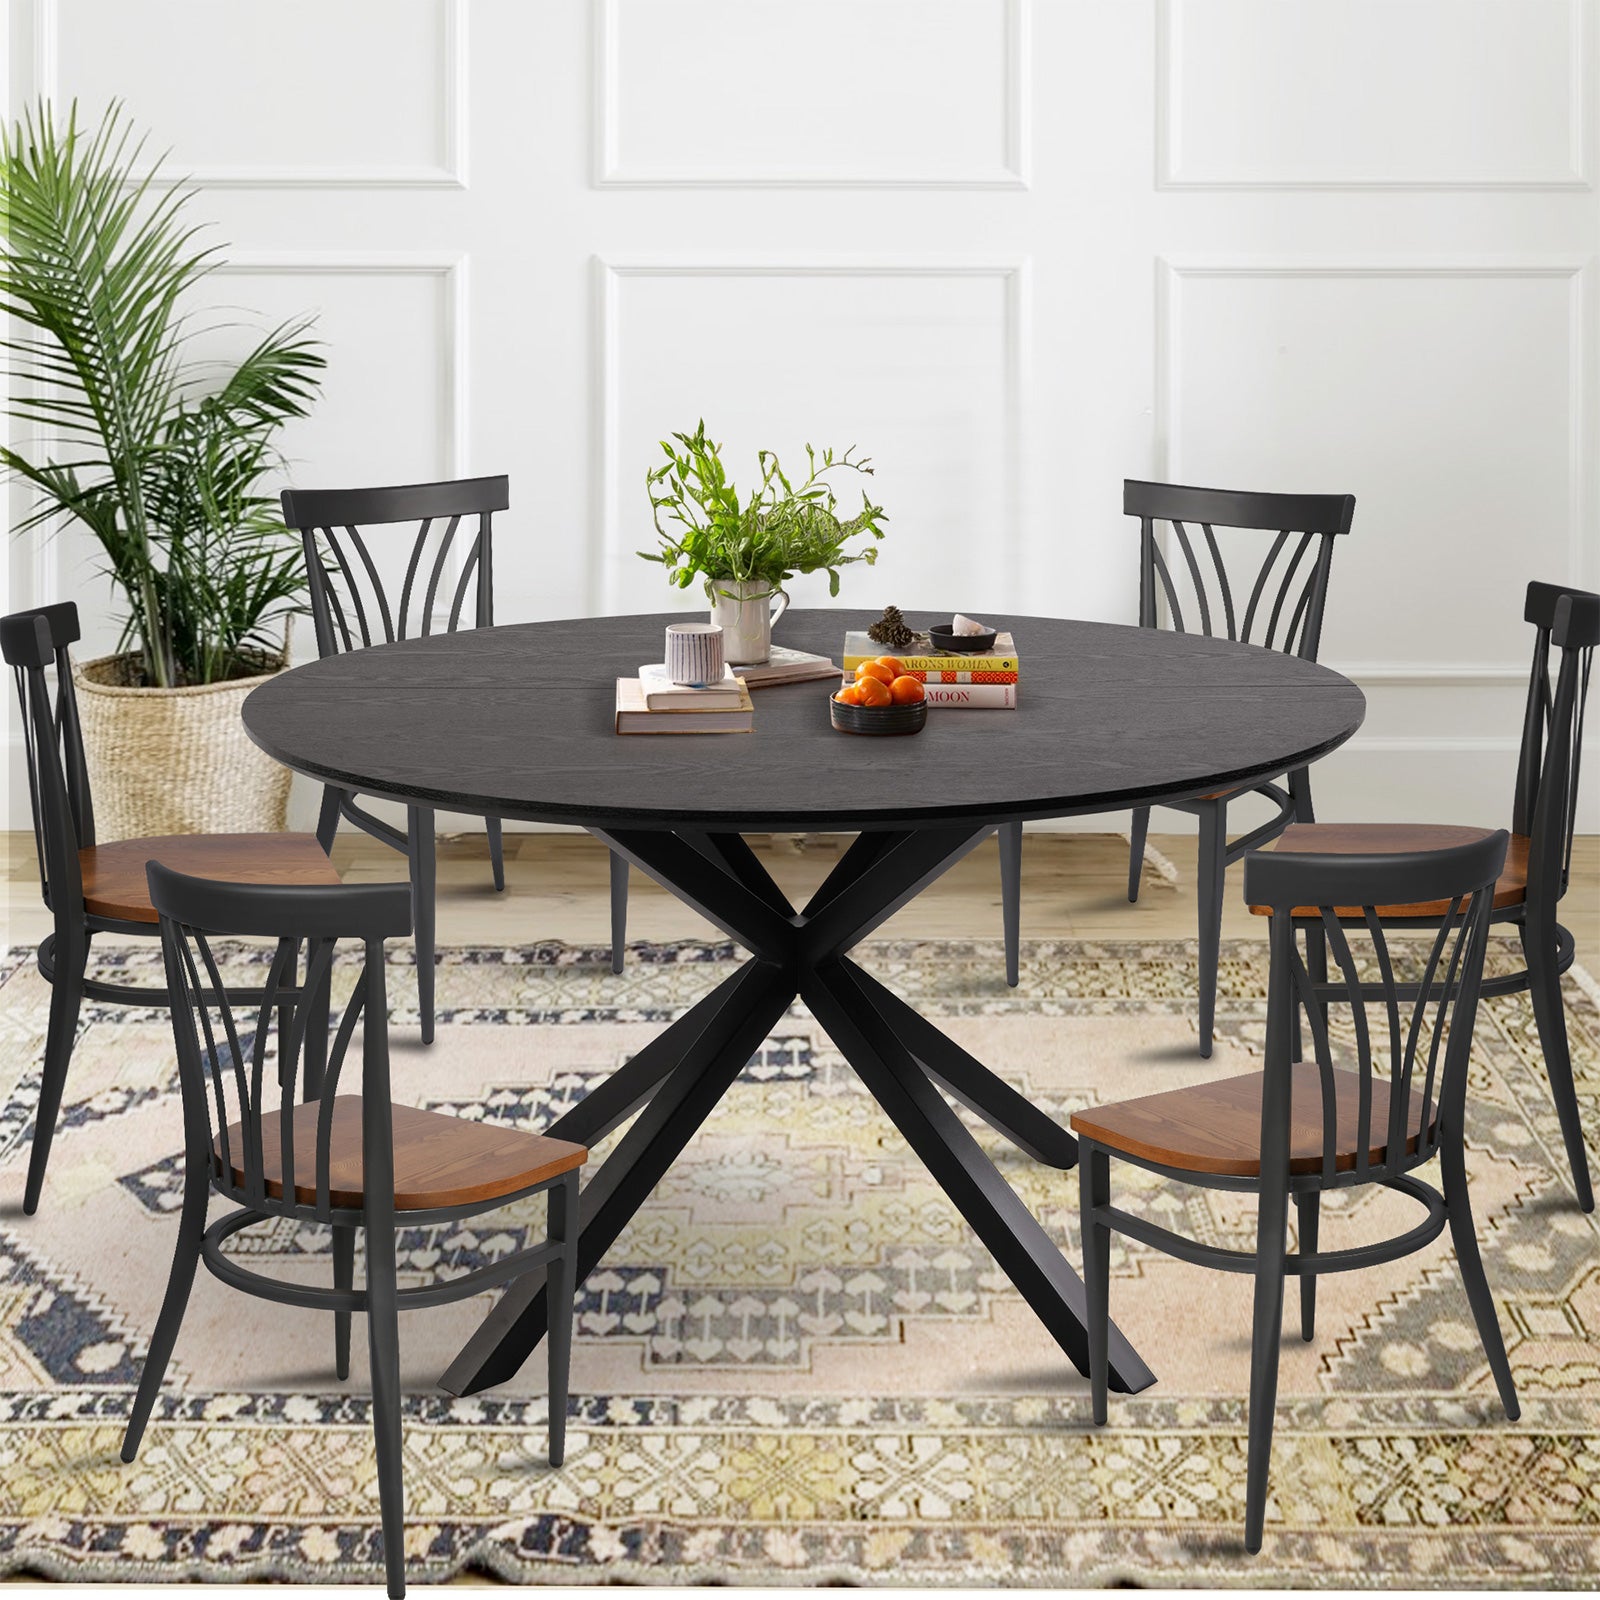 53" Round Mid-Century Modern Wooden Kitchen Dining Table for 4-6 with Solid Metal Leg, Black Wood Grain